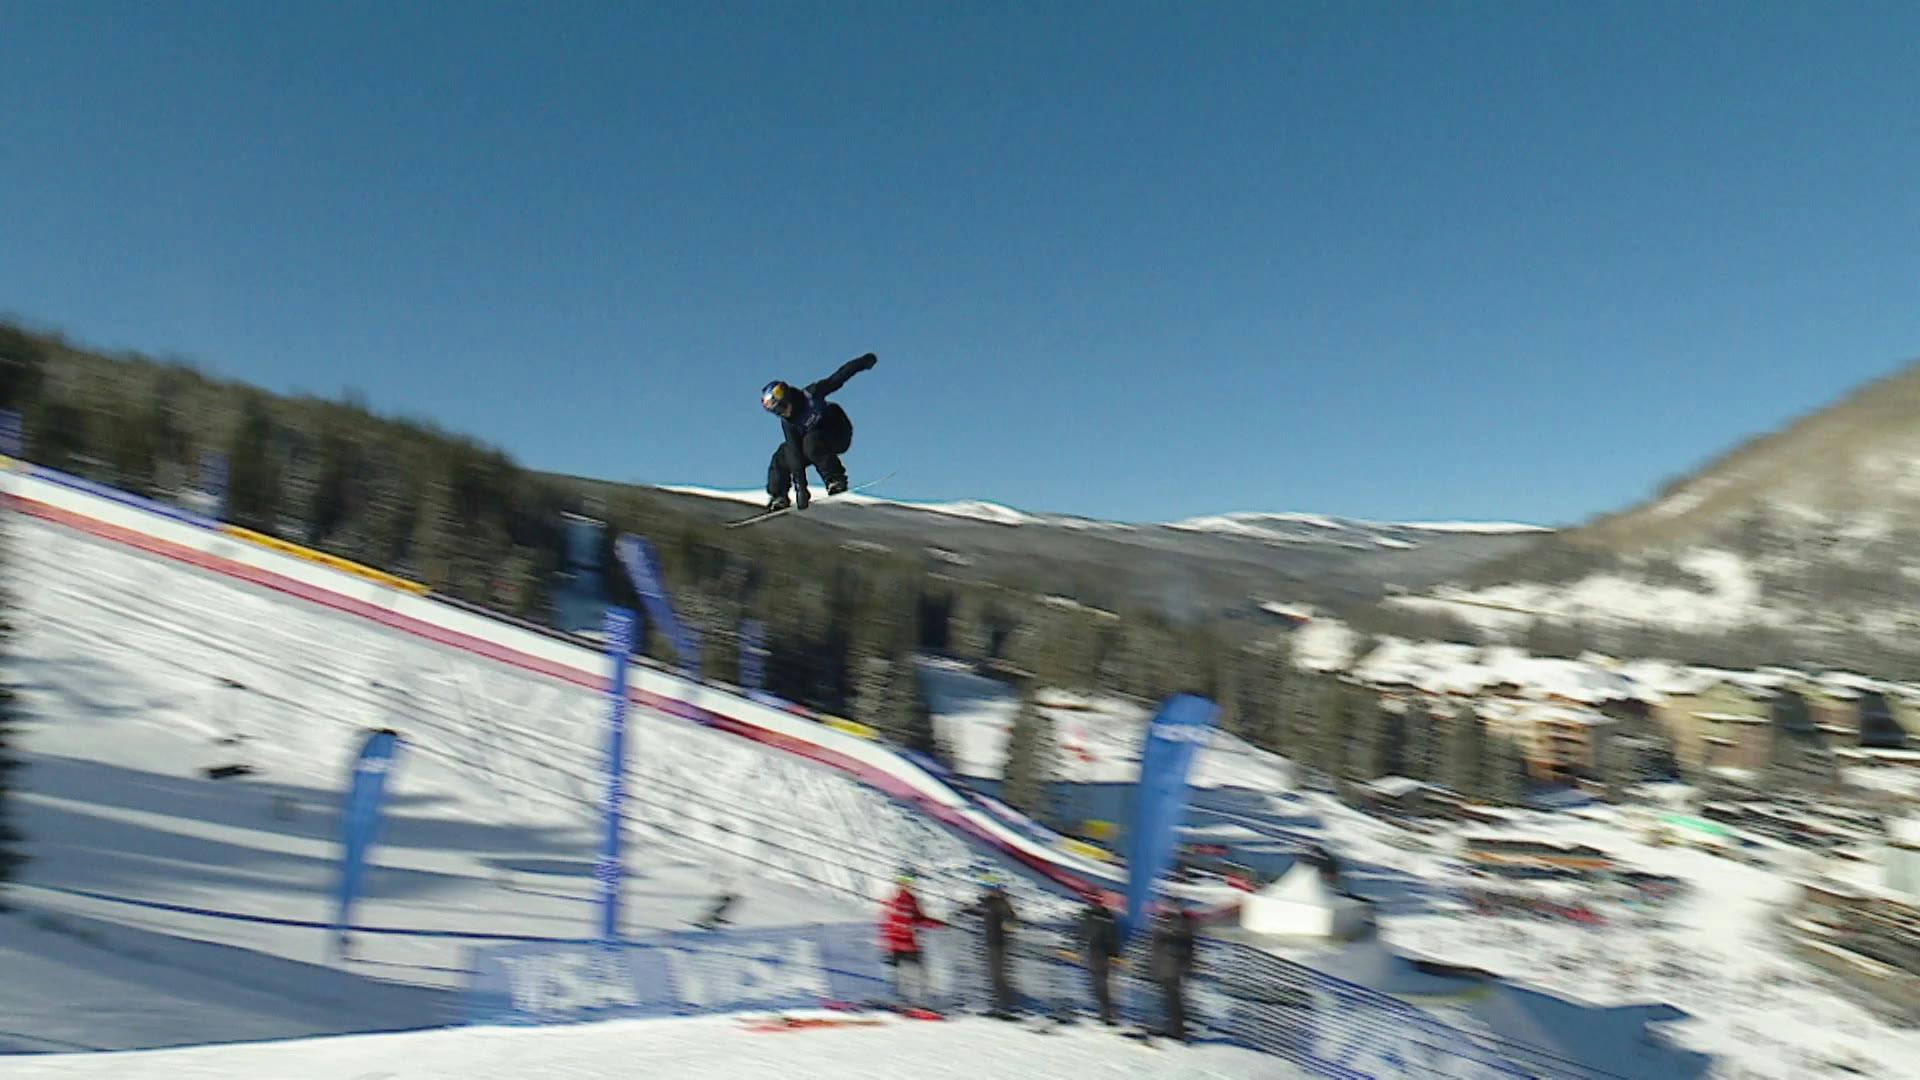 Toyota U.S. Grand Prix Copper Mountain: Men's & Women's US Snowboard World Cup Big Air Highlights | USSS Event Replays